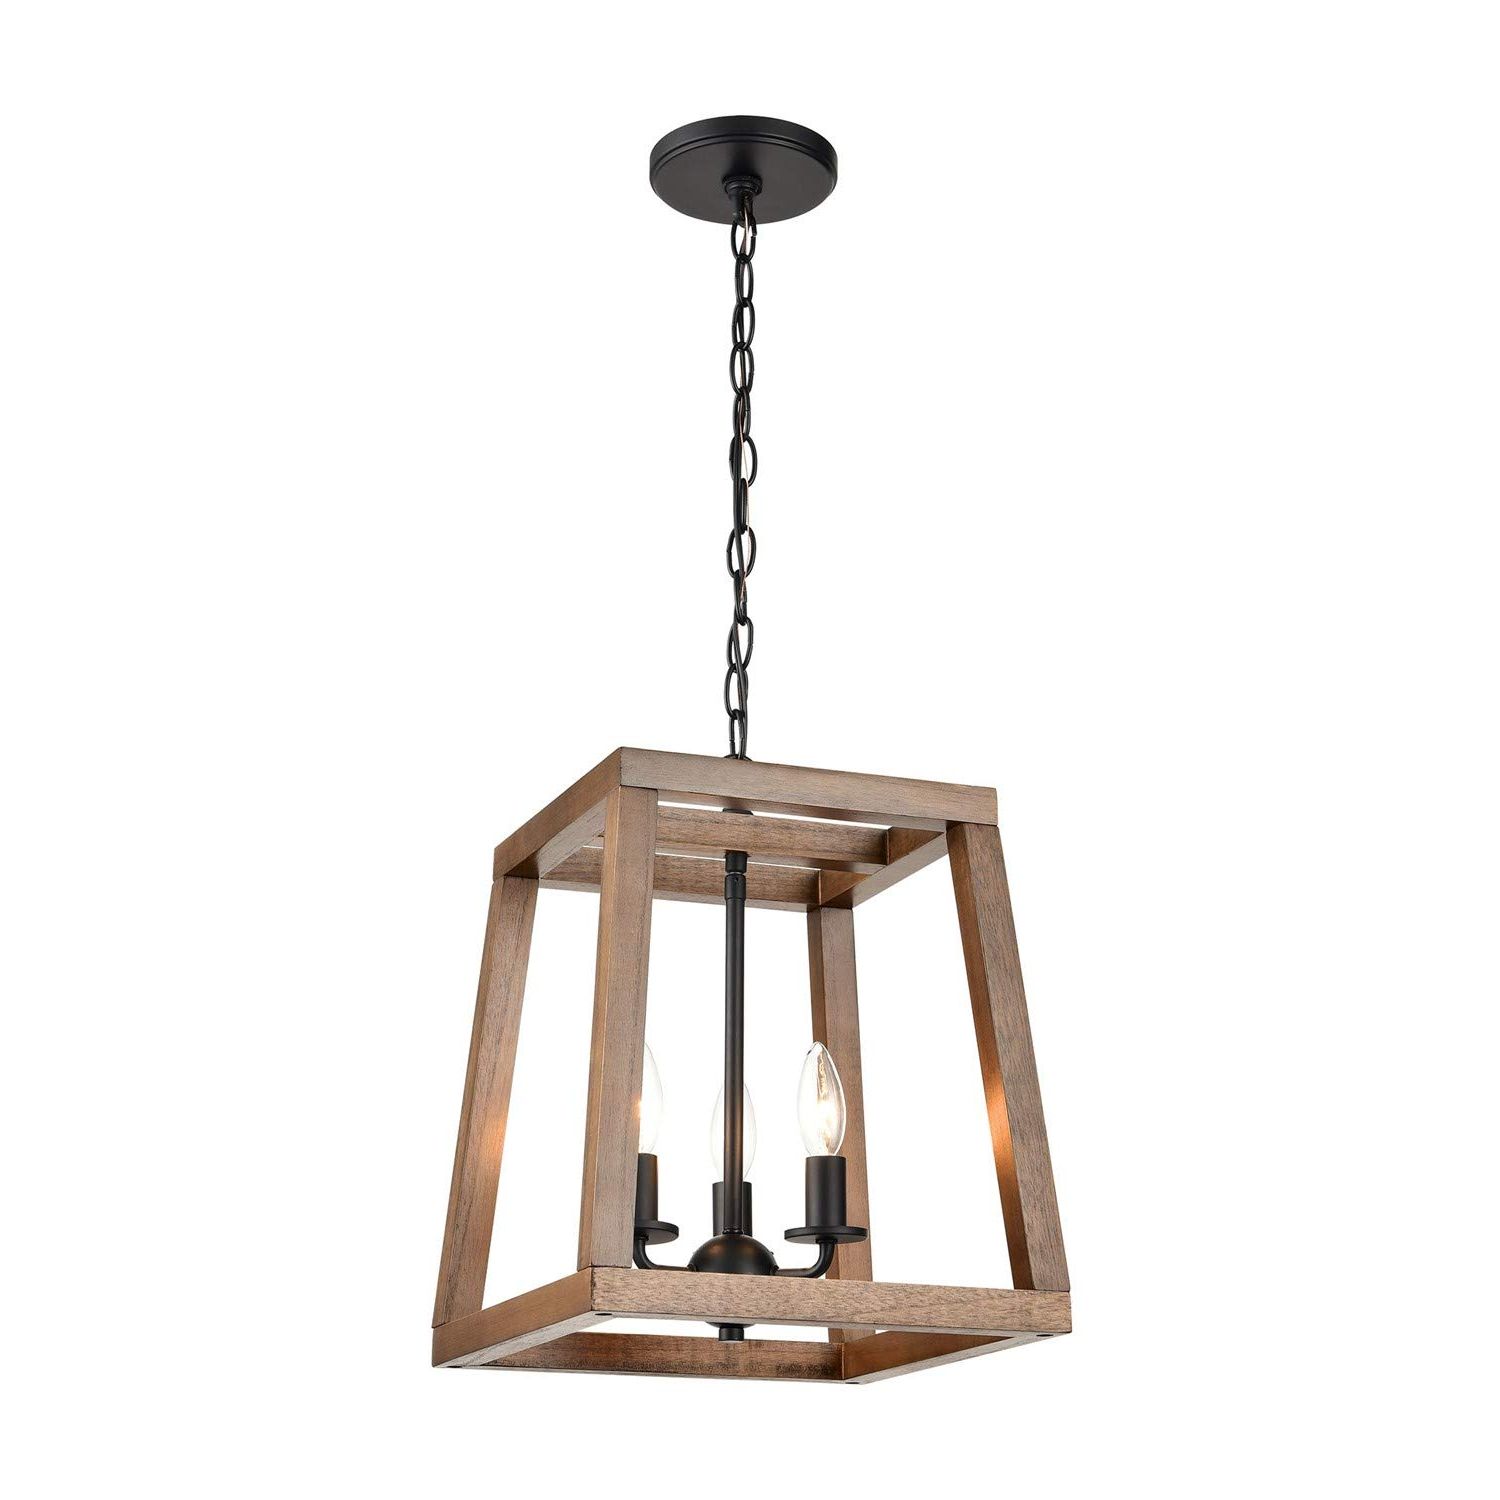 Best And Newest Barrow 3 Light Chandelier In Birchwood And Matte Black – – Amazon Intended For Birchwood Lantern Chandeliers (View 1 of 15)